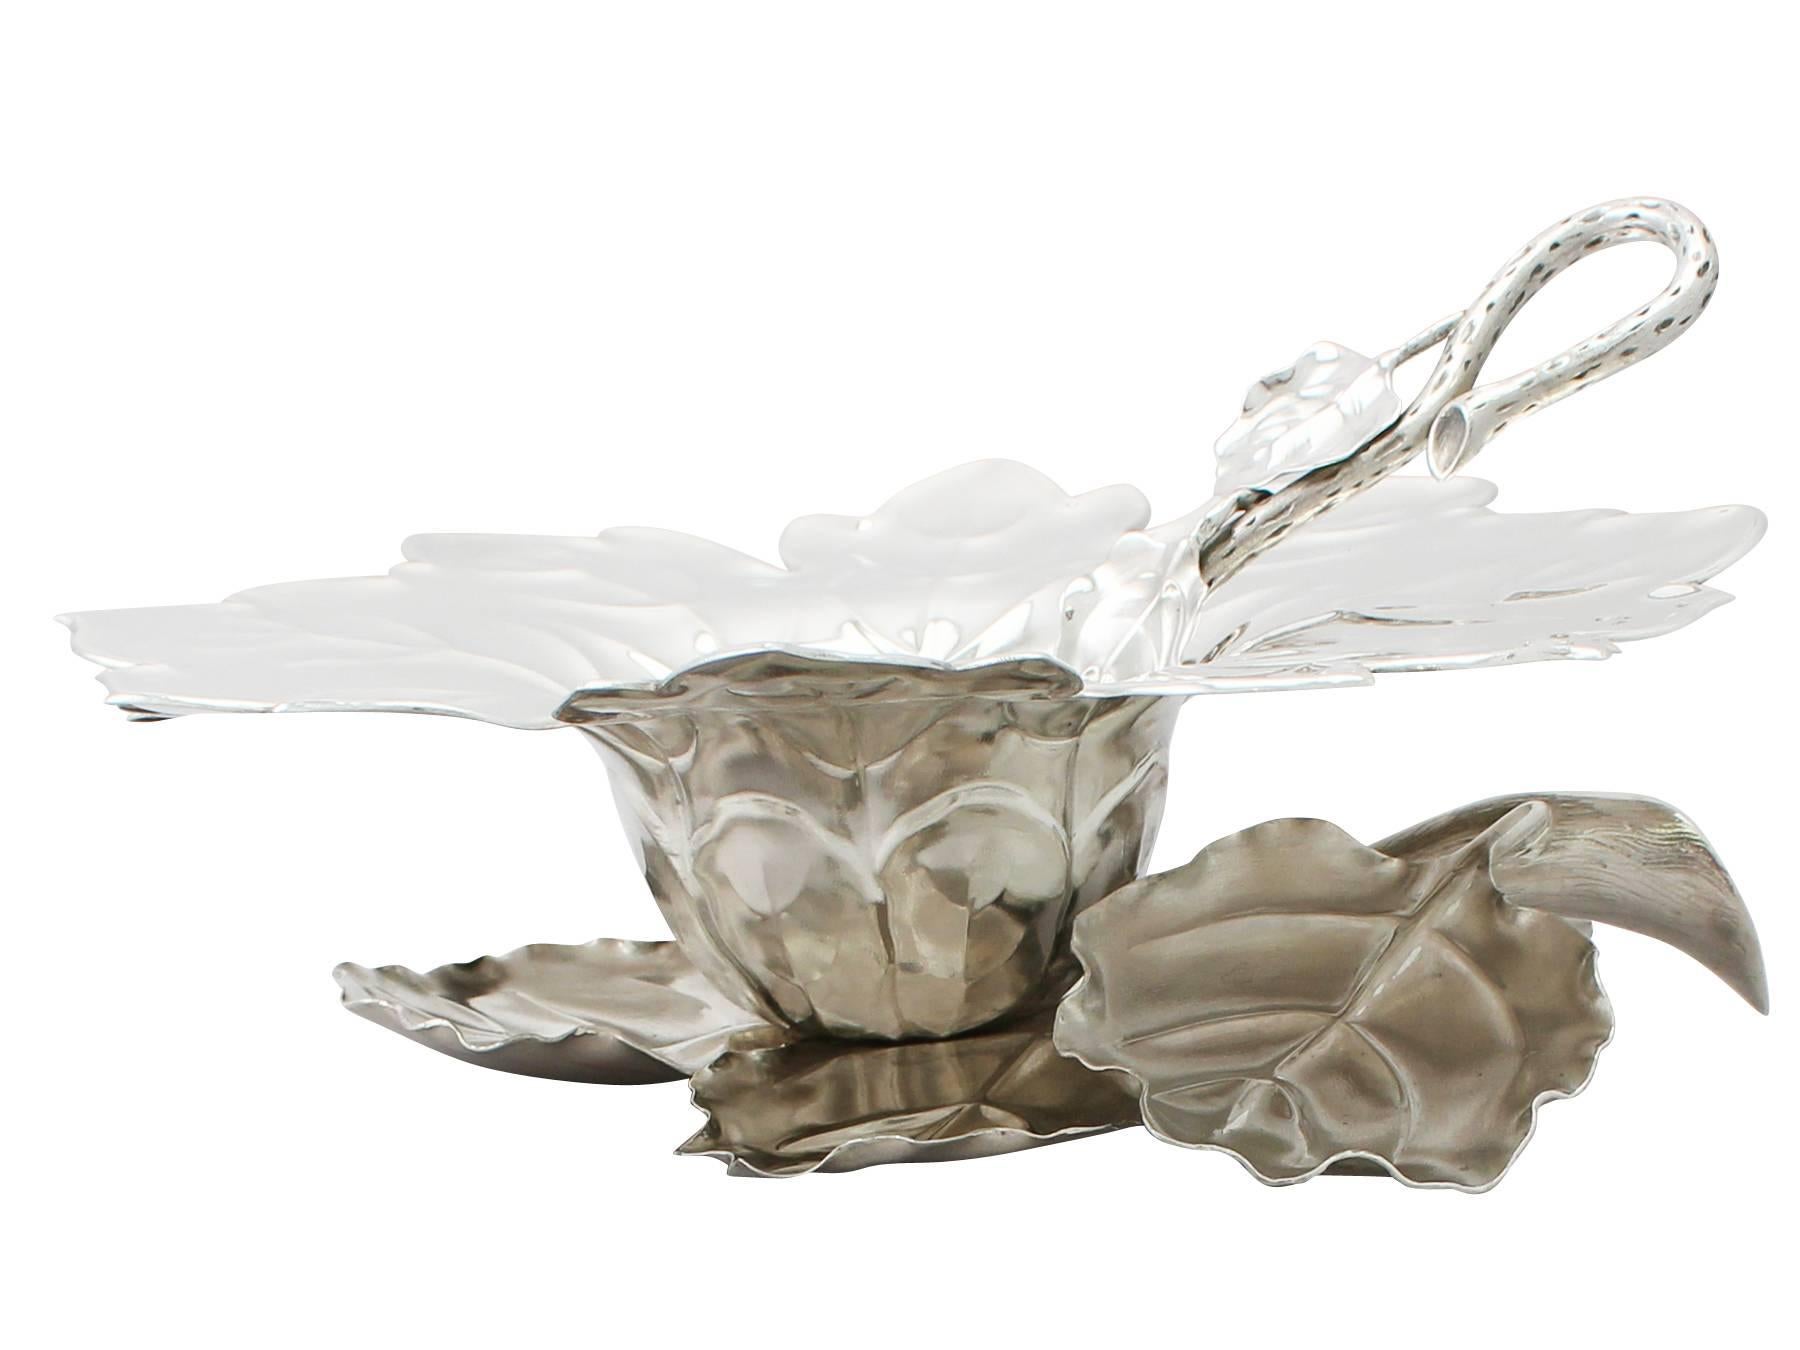 An exceptional, fine and impressive, unusual continental sterling silver serving dish: part of our continental silverware collection.

This exceptional continental vintage silver serving dish has naturalistic, leaf style form.

The surface of